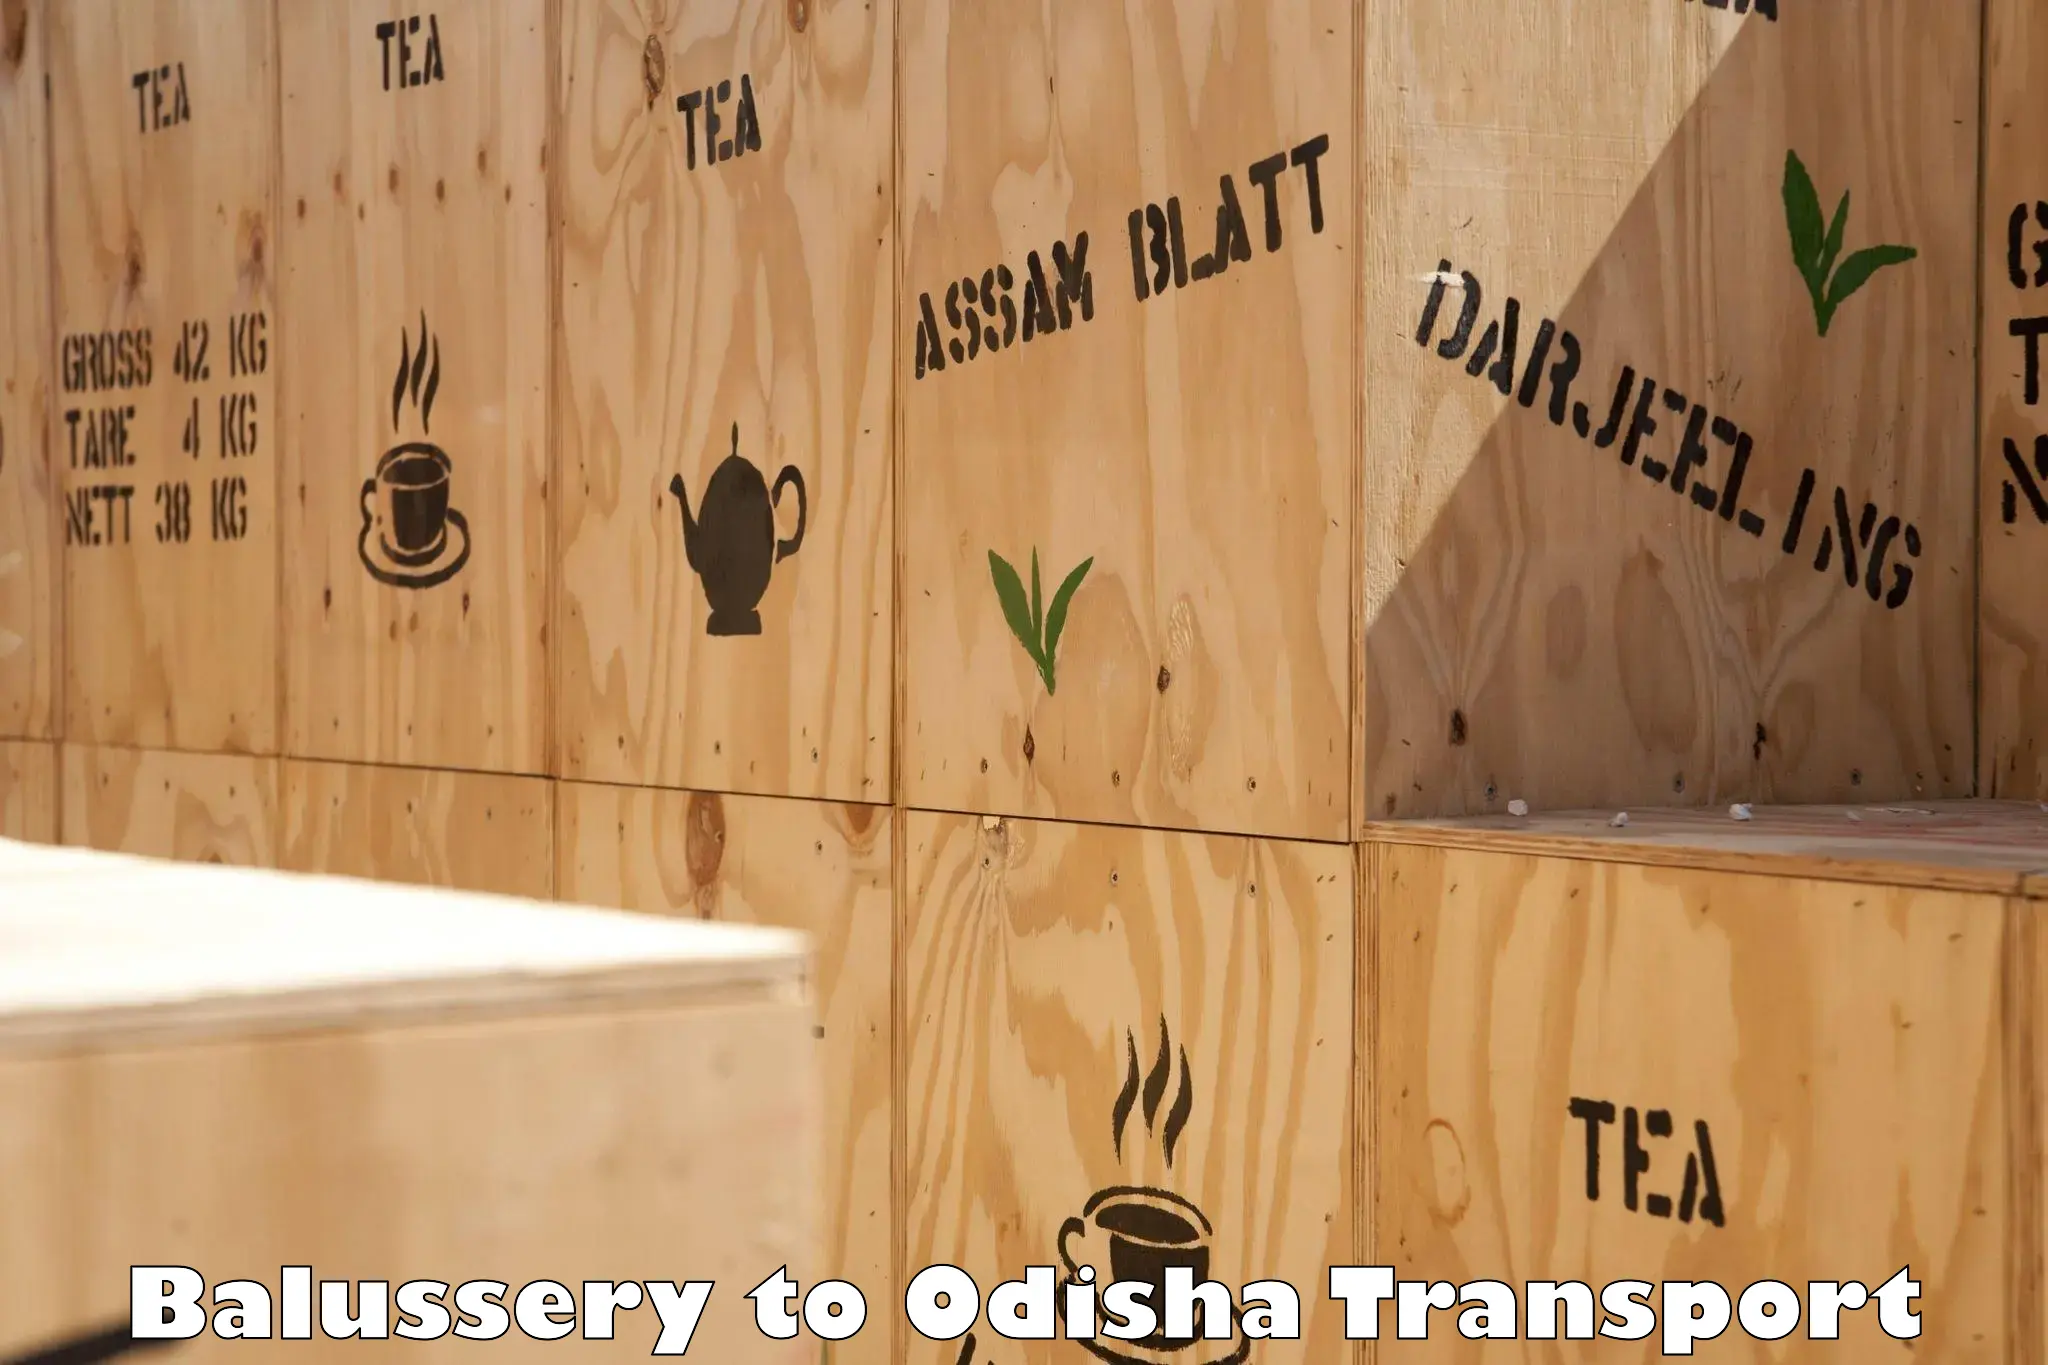 Online transport in Balussery to Odisha